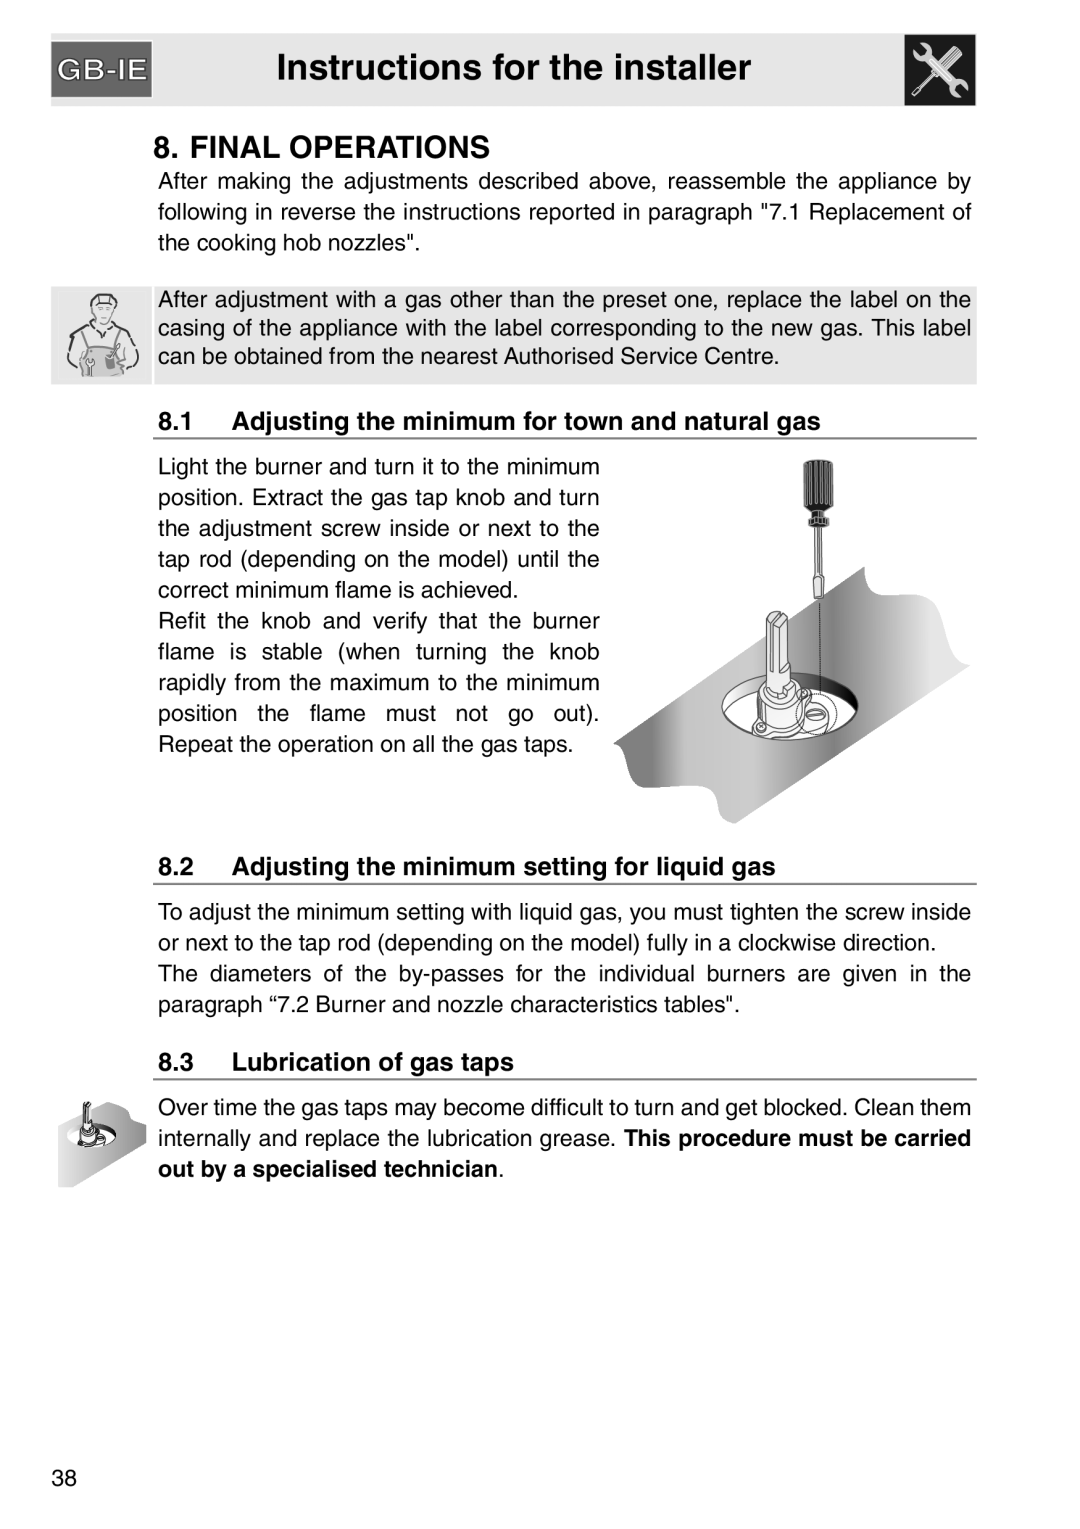 Smeg gas cooktop manual Final Operations, Instructions for the installer, 8.1Adjusting the minimum for town and natural gas 